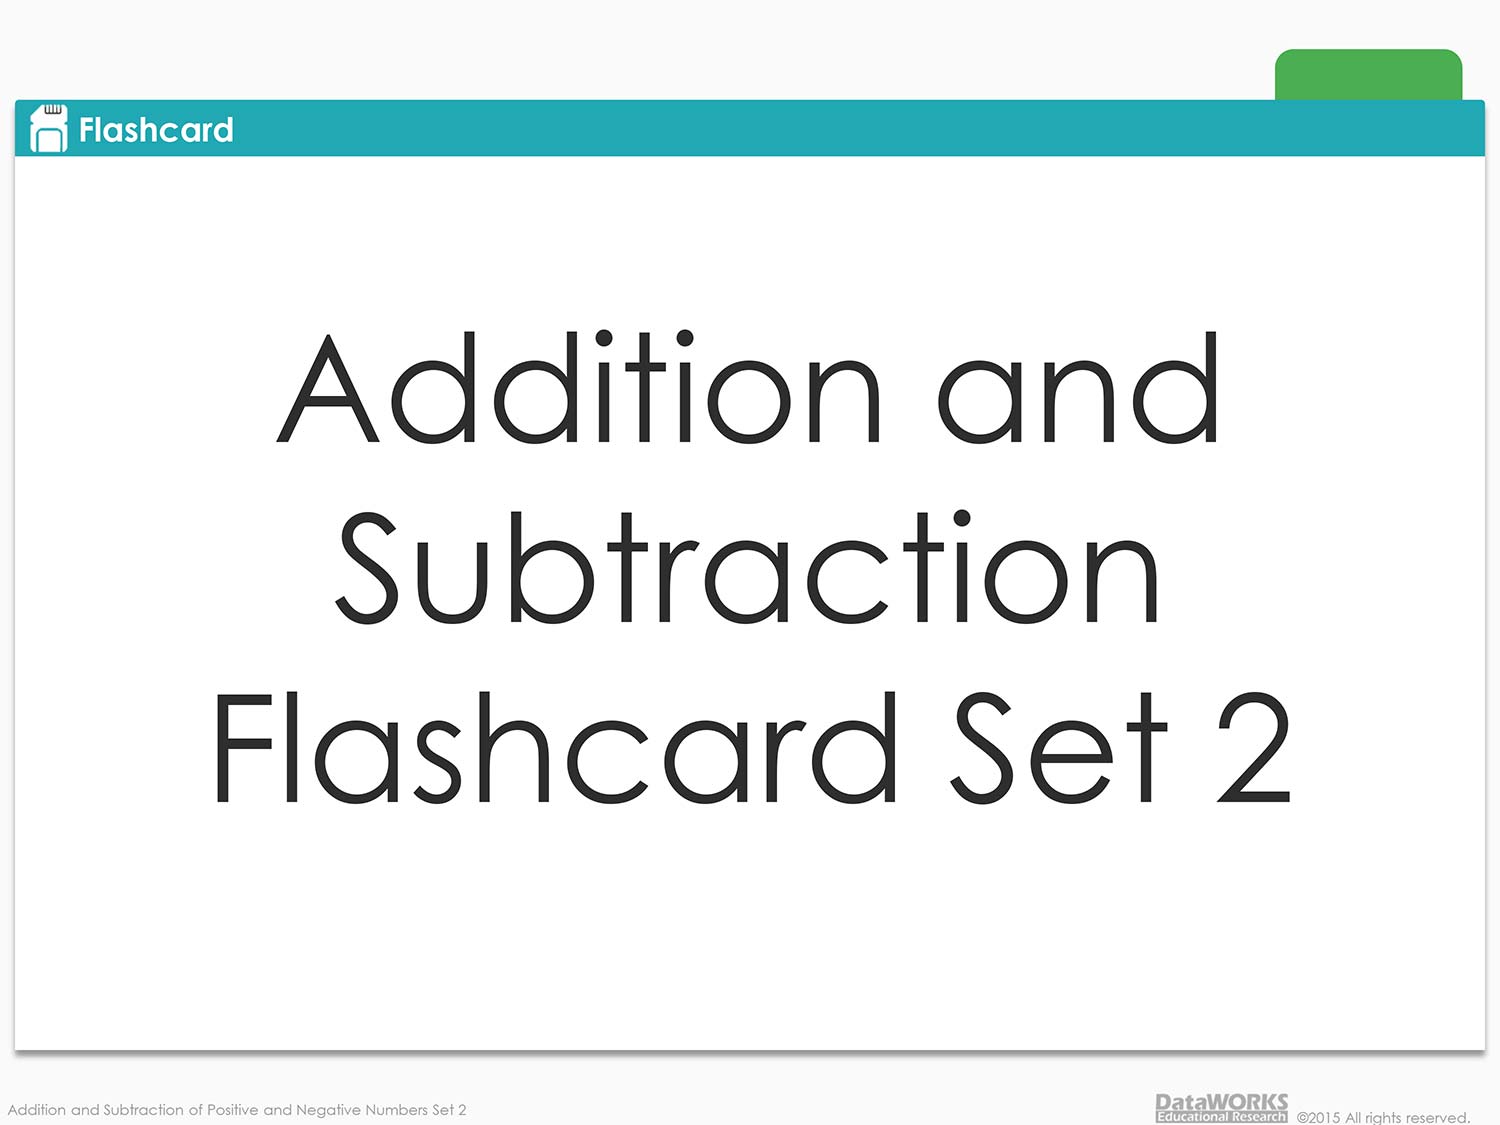 addition-and-subtraction-of-positive-and-negative-numbers-flashcards-set-2-lesson-plans